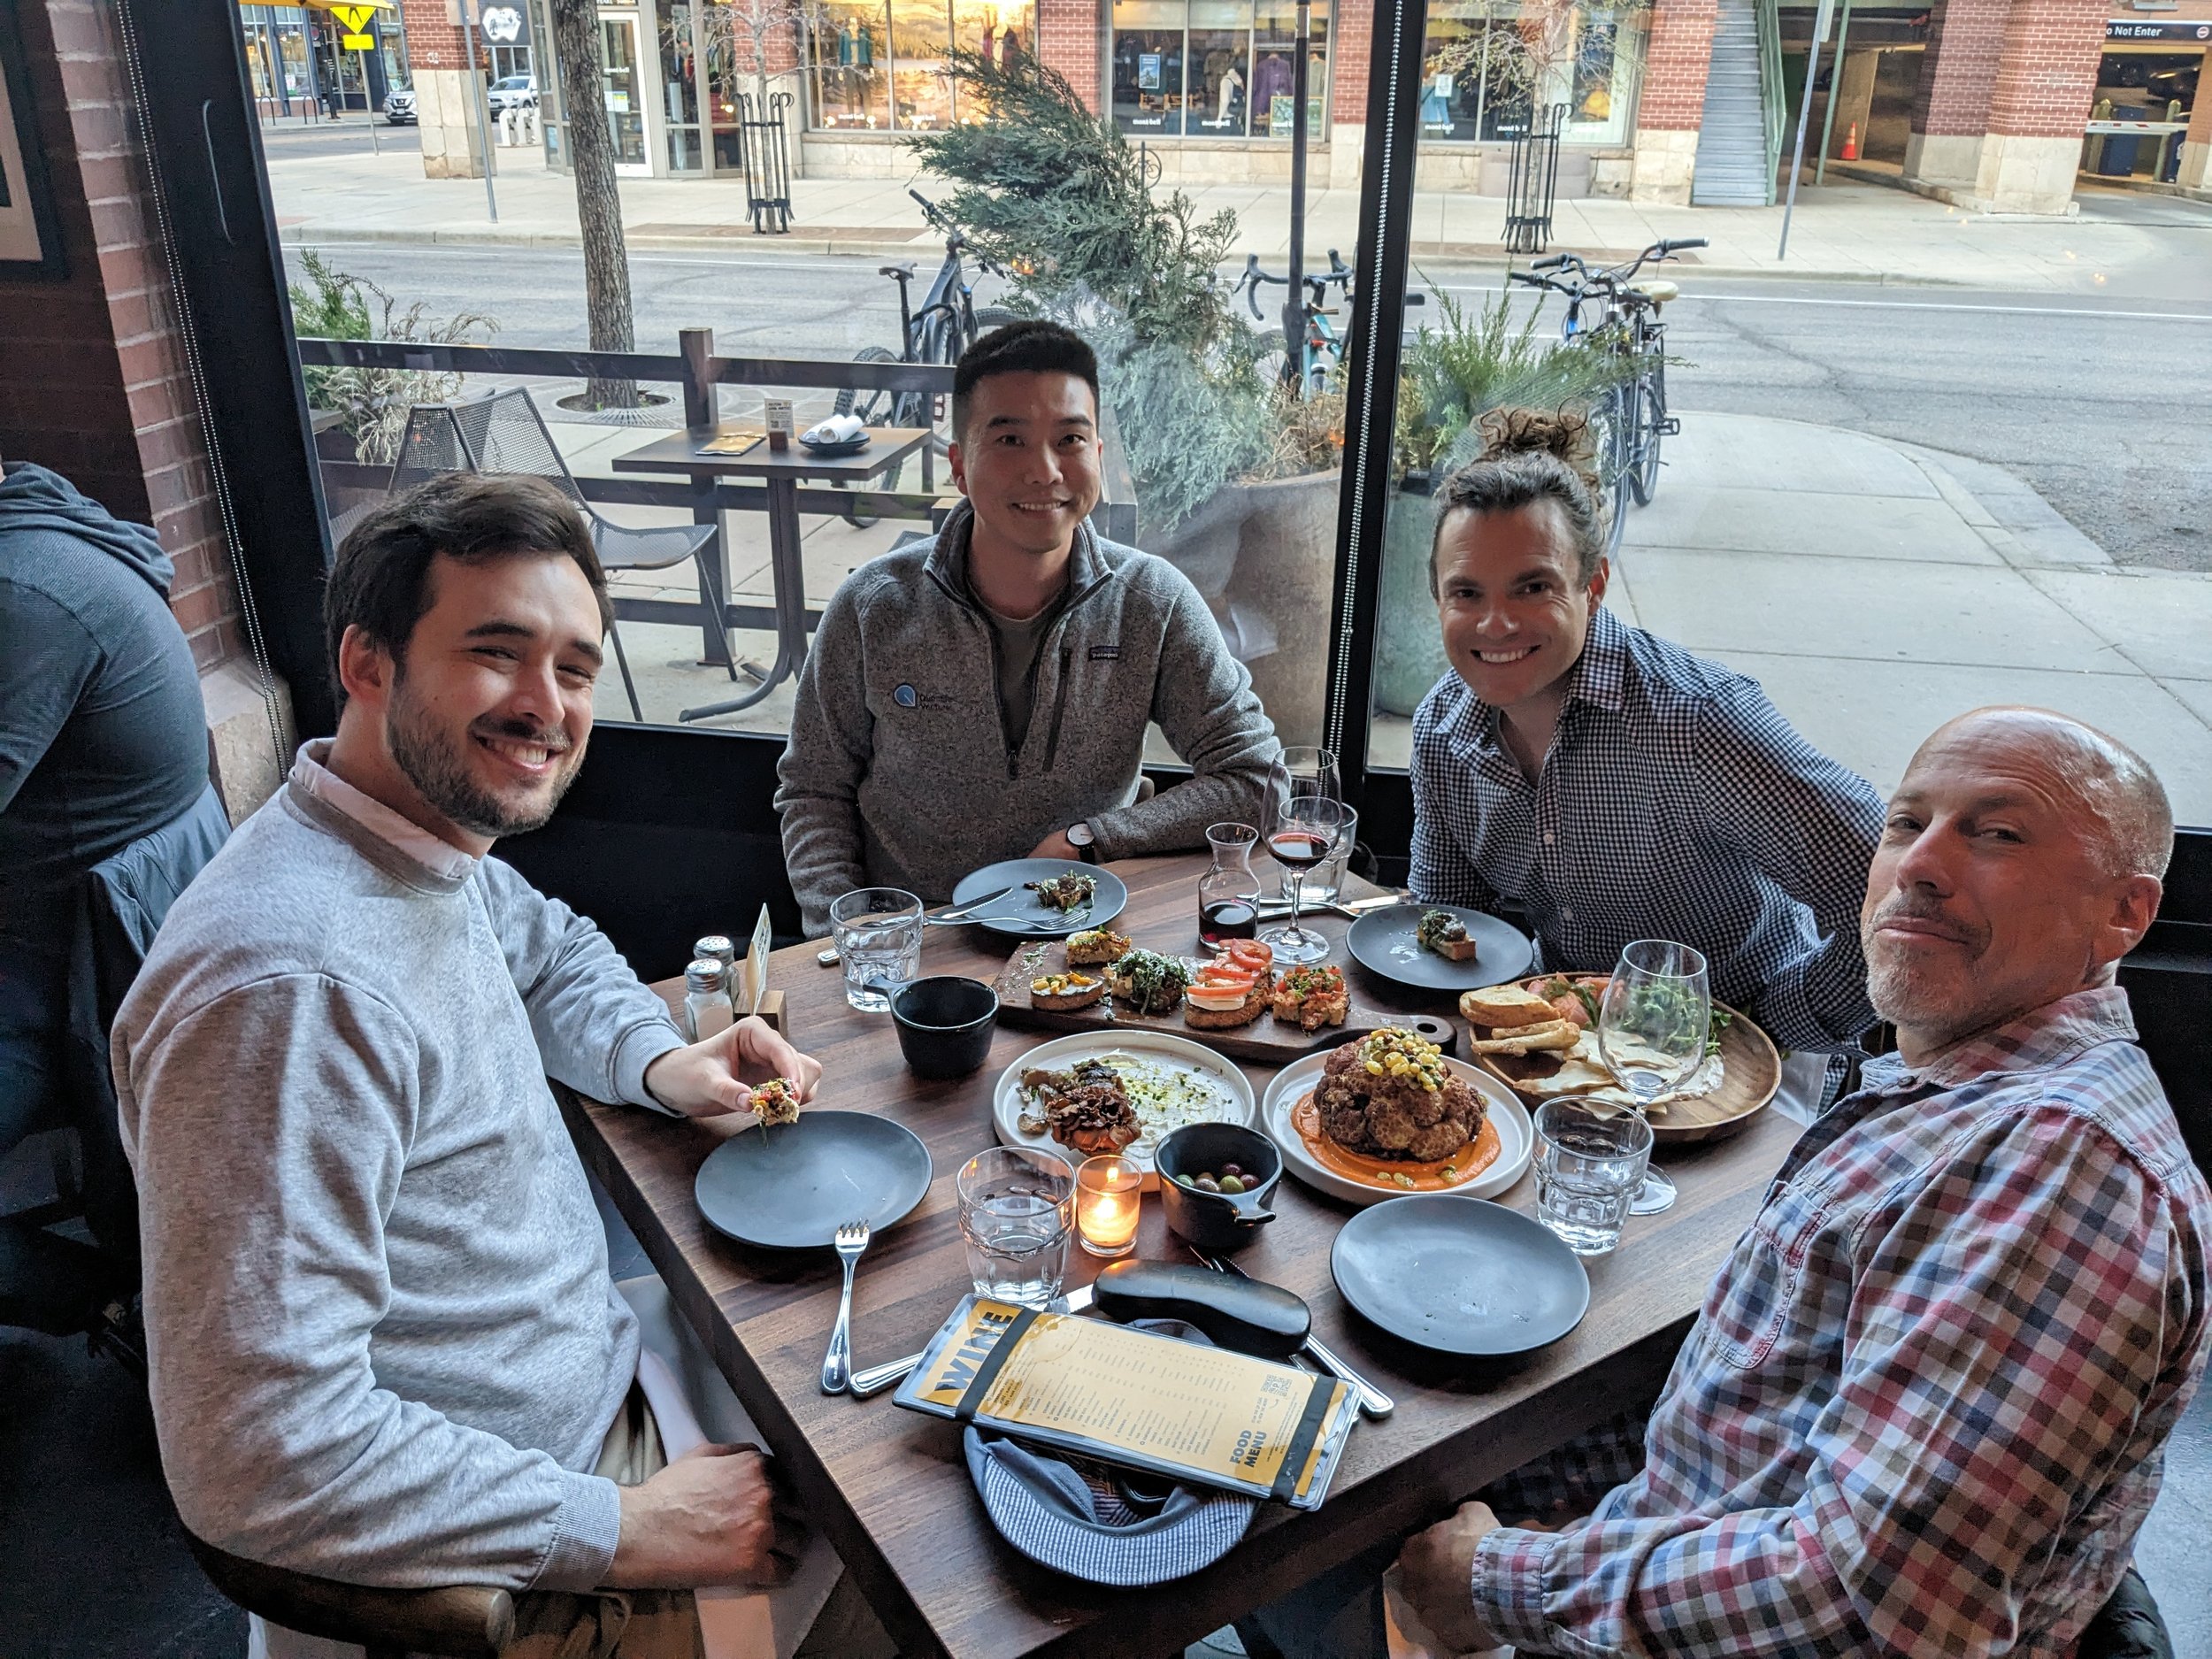 Dinner in Boulder, CO to discuss Environment and Resilience efforts